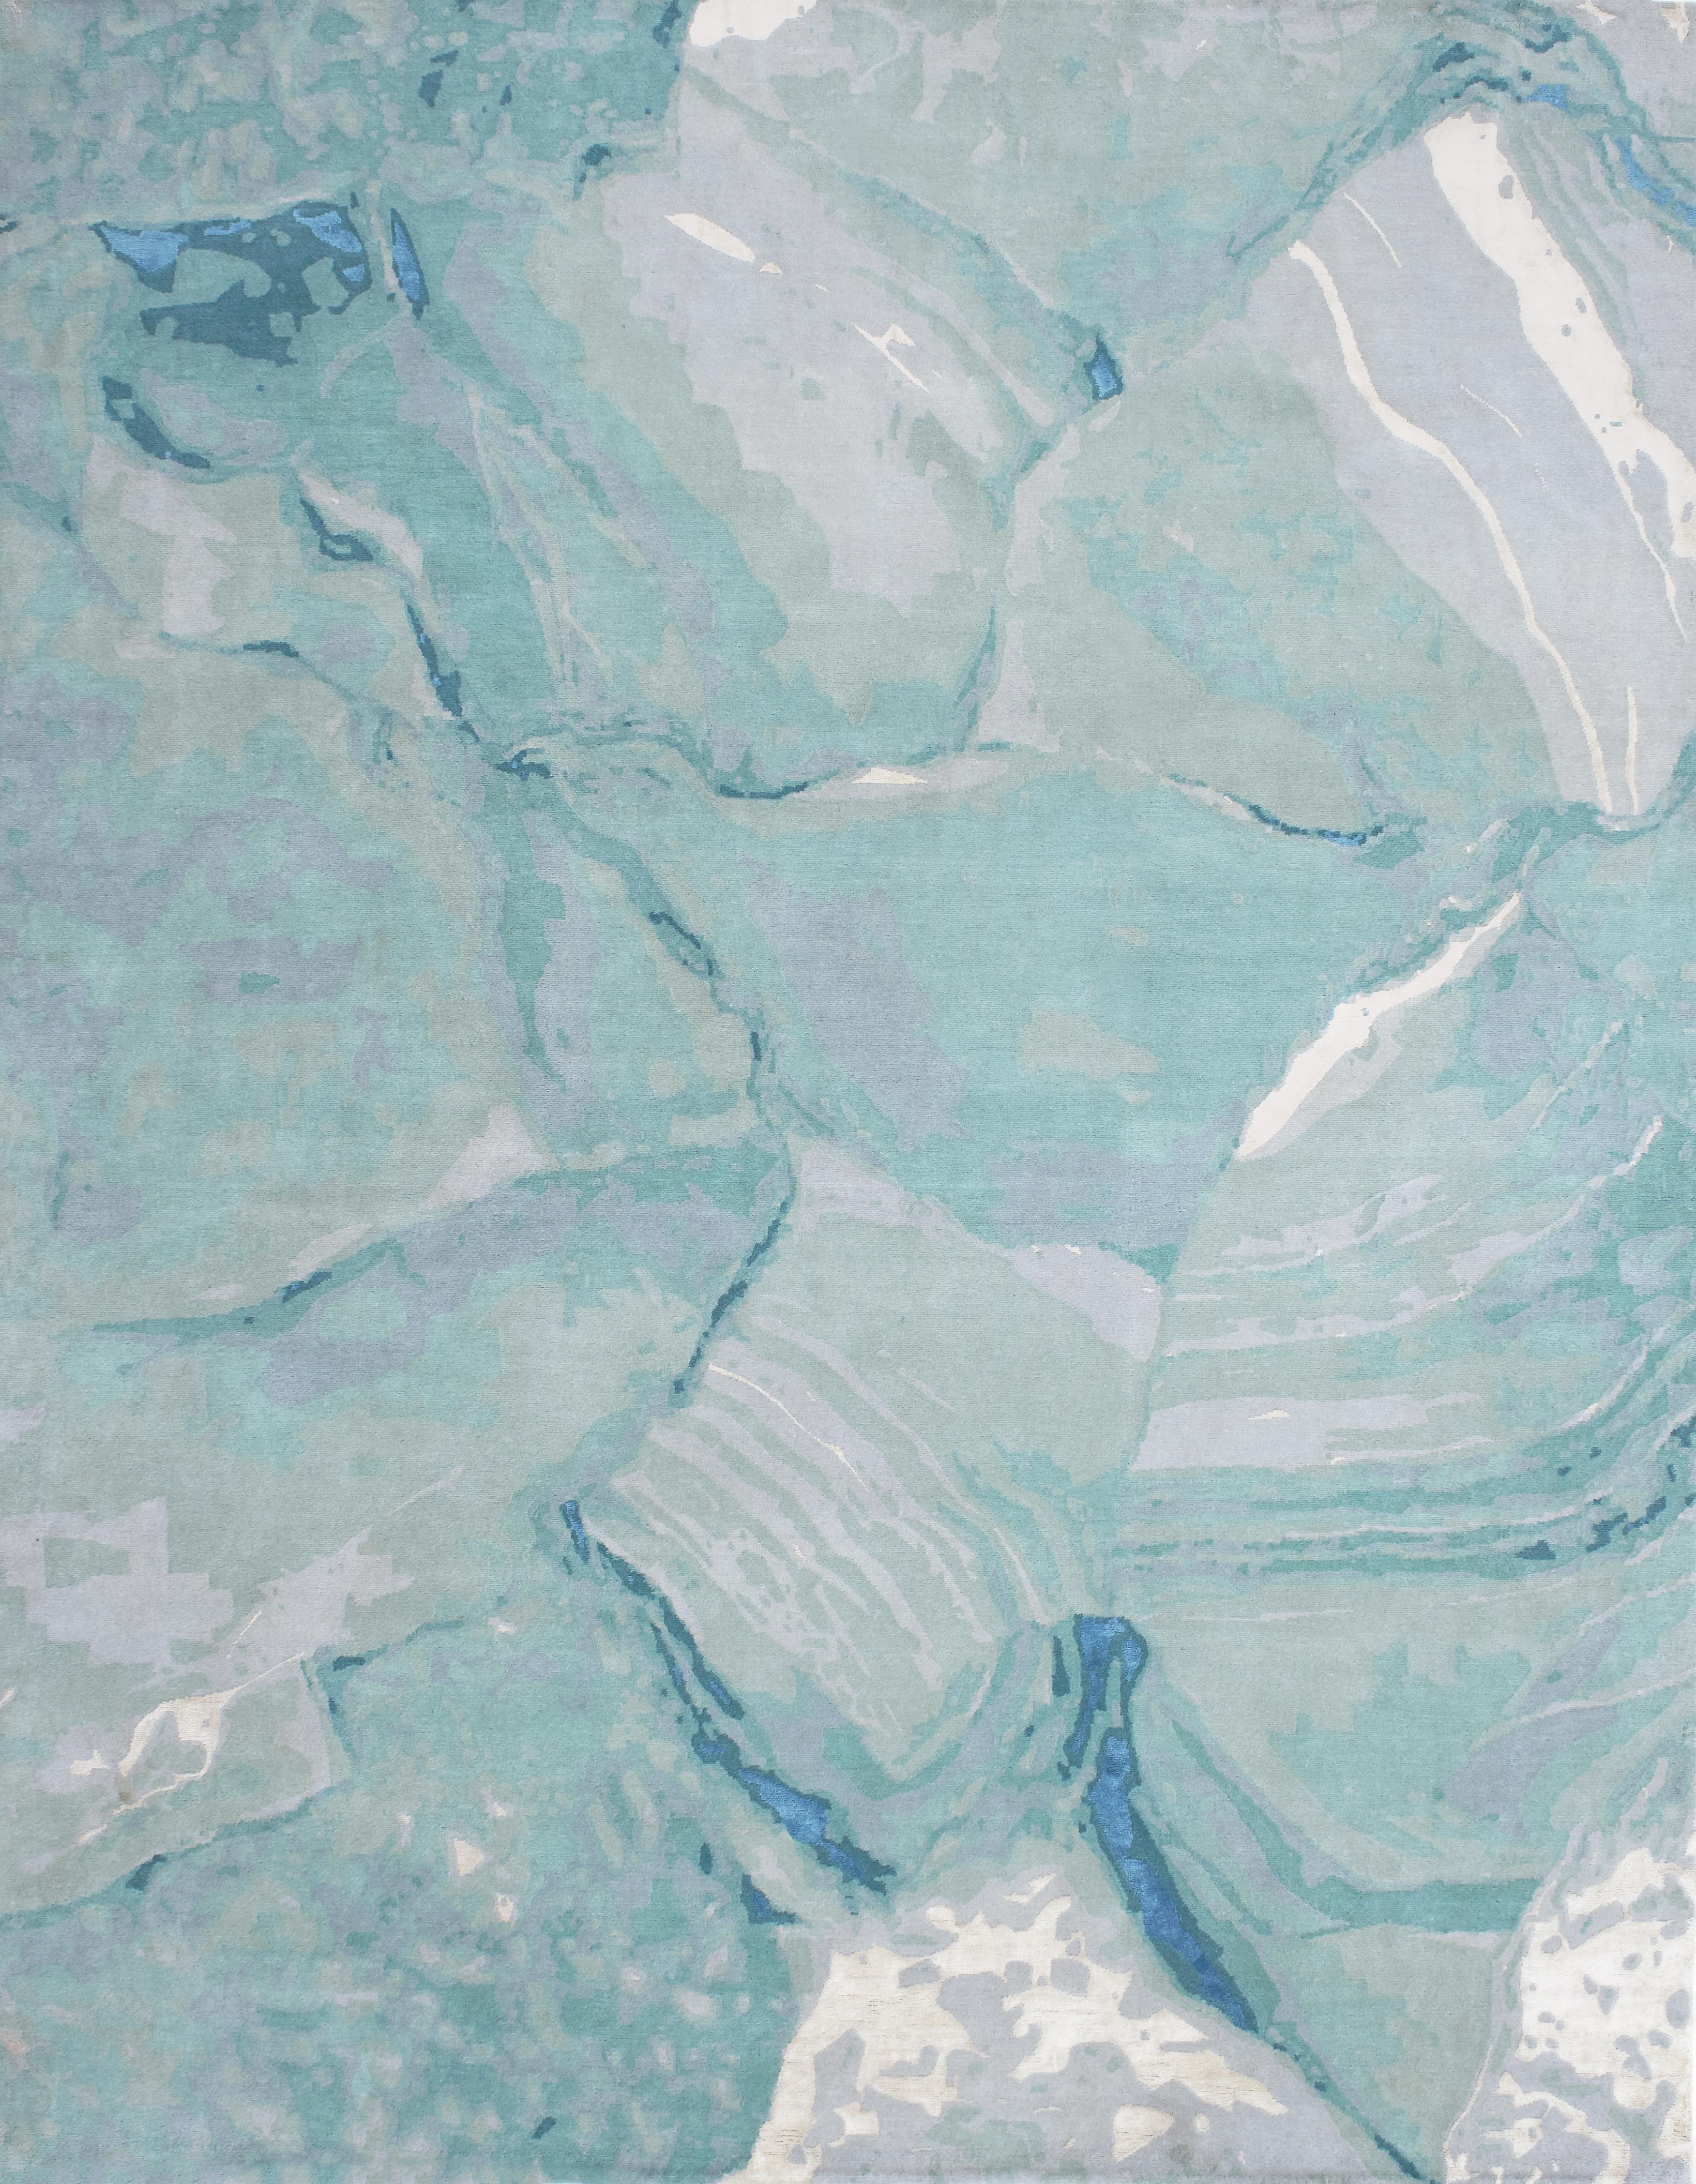 This whimsical rug is made of a delicate blend of hand knotted Tibetan wool and fine silk. The striking abstract design is inspired by the aquamarine pleasures surrounding the painting depicting a Californian swimming pool by David Hockney. The